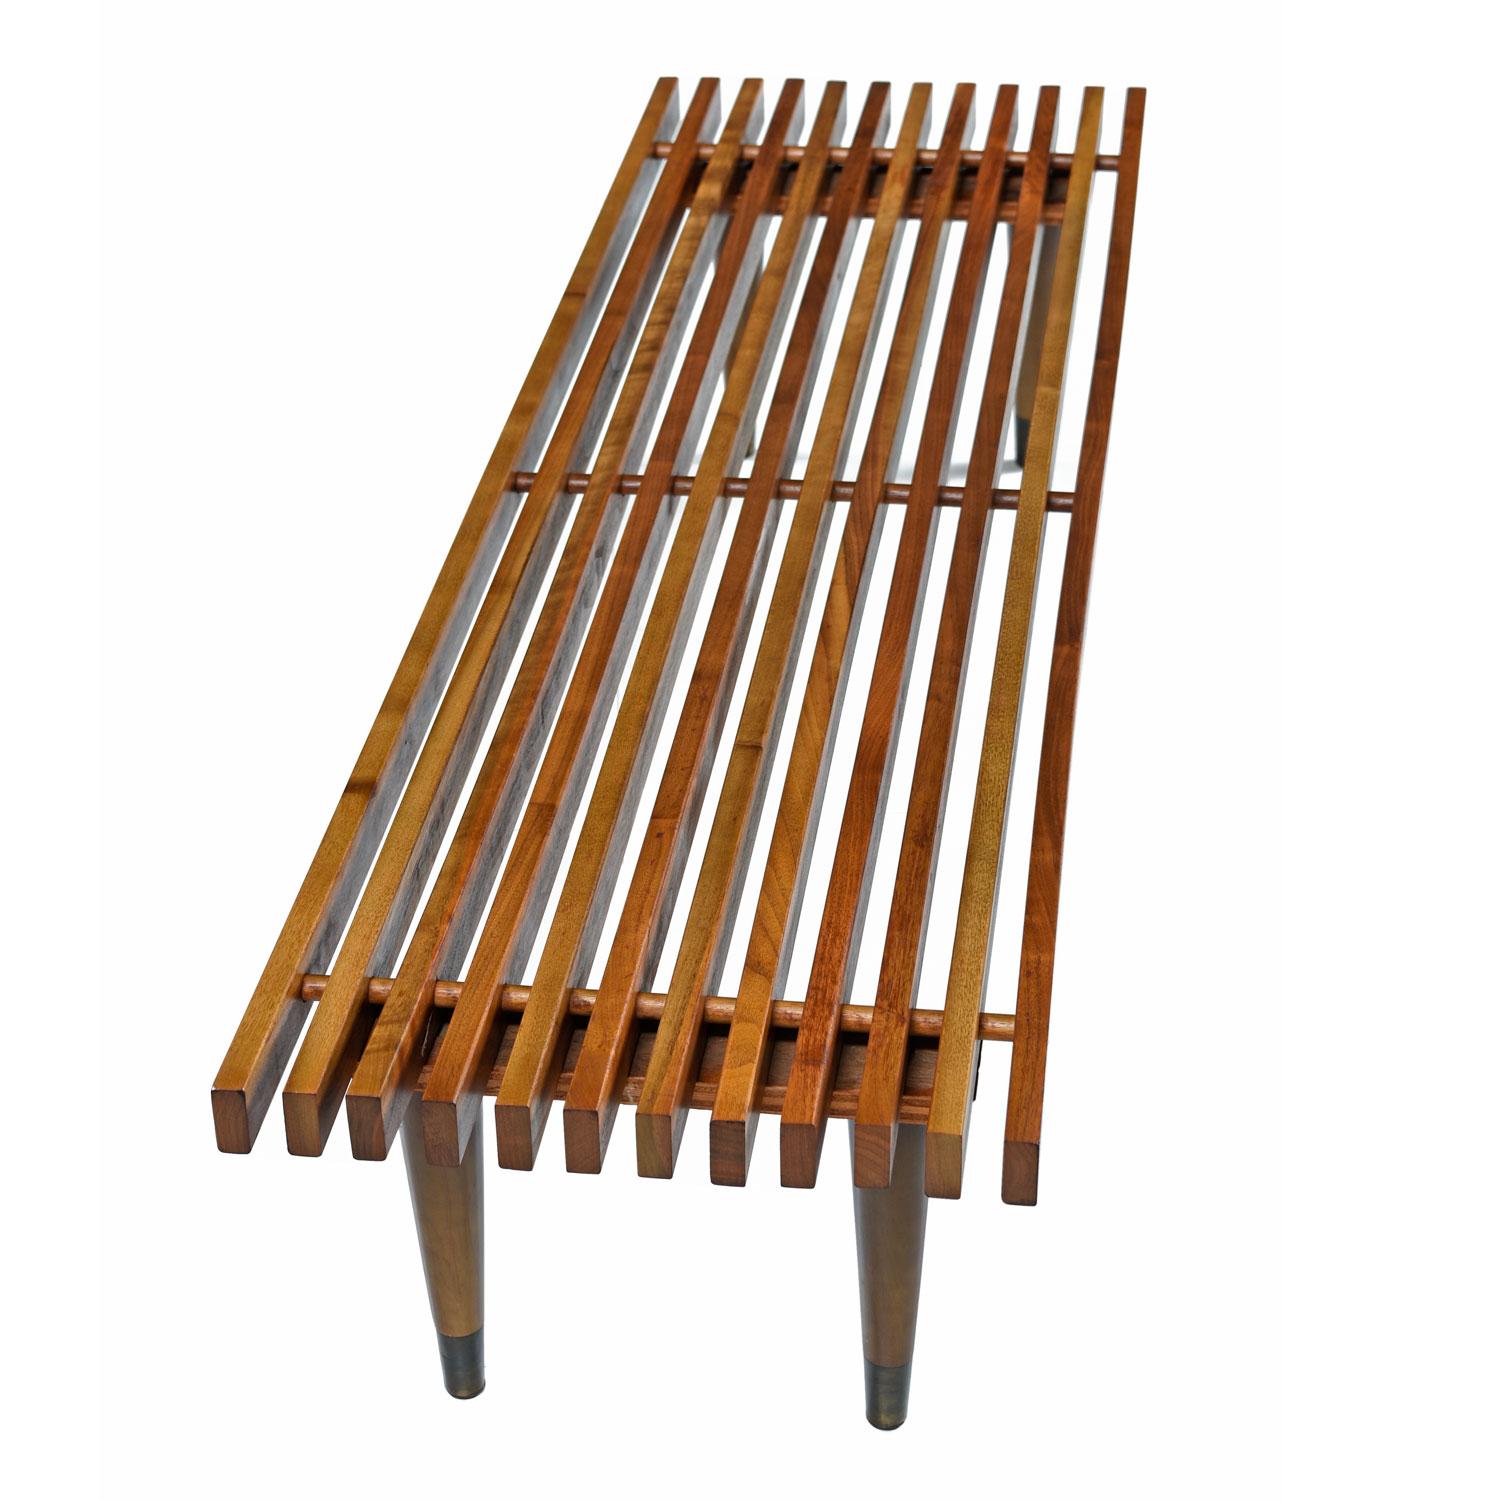 Without any markings or typical signs of production furniture of the 1950s, we think this may be a home made creation. The Mid-Century Modern slat bench is perhaps one of the most recognizable and beloved pieces of furniture from the period. Every